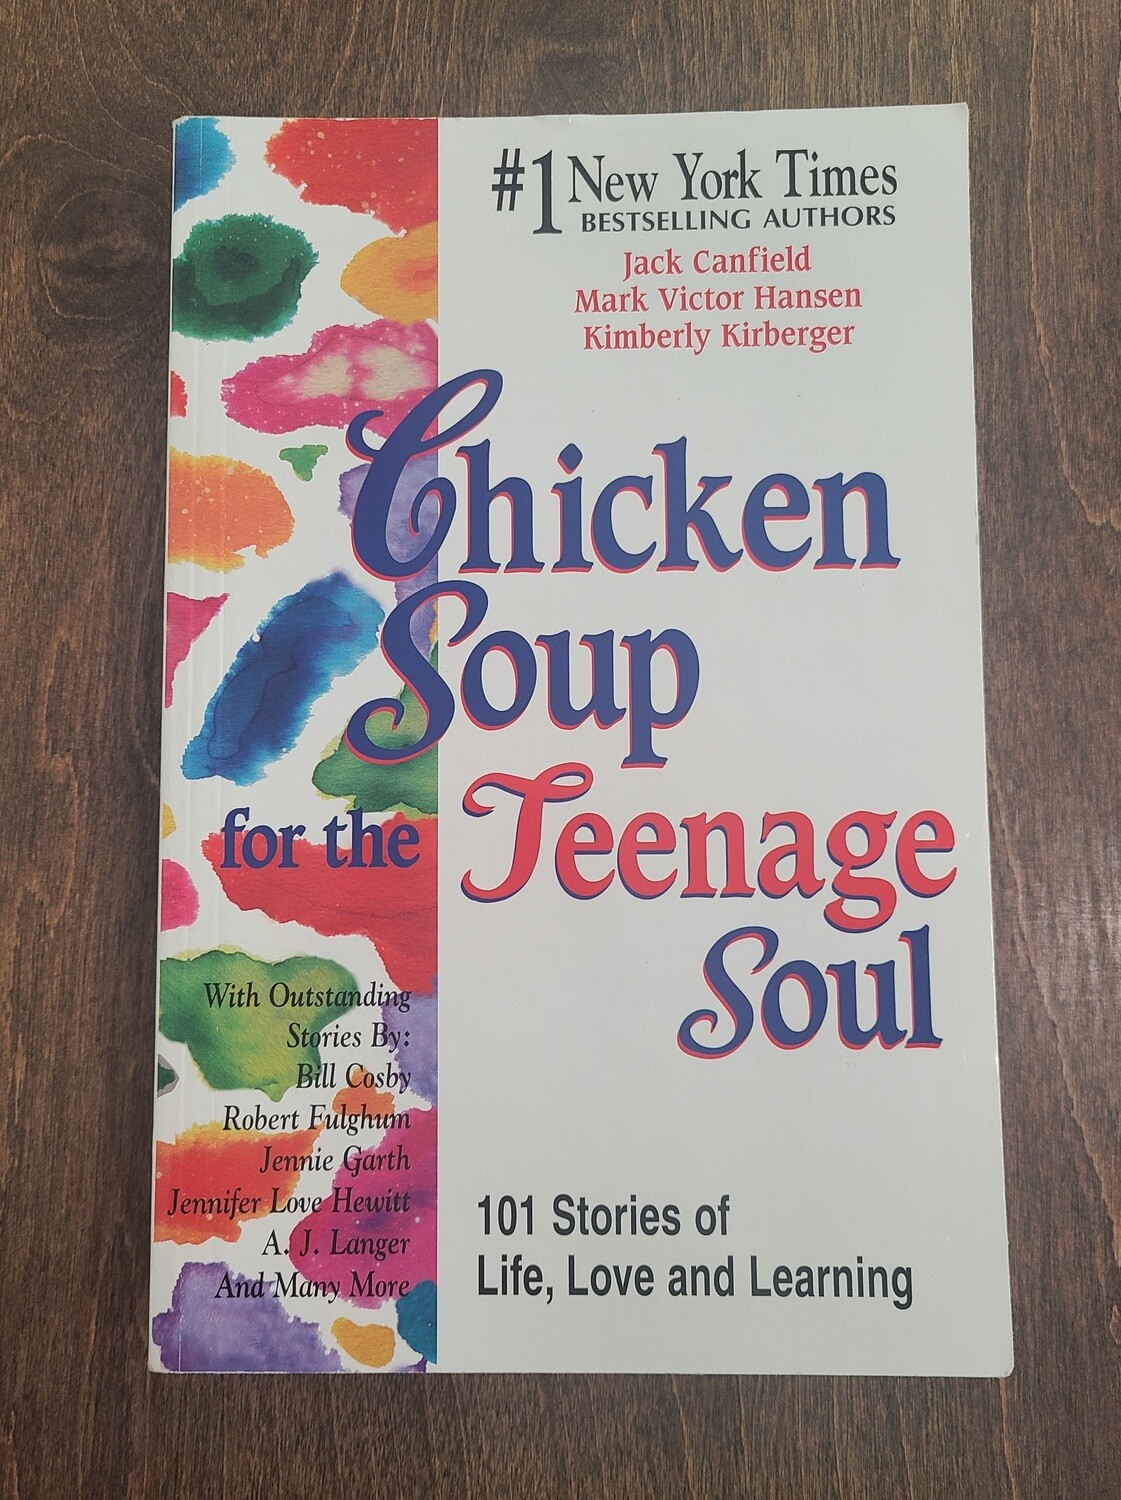 Chicken Soup for the Teenage Soul by Jack Canfield, Mark Victor Hansen, and Kimberly Kirberger